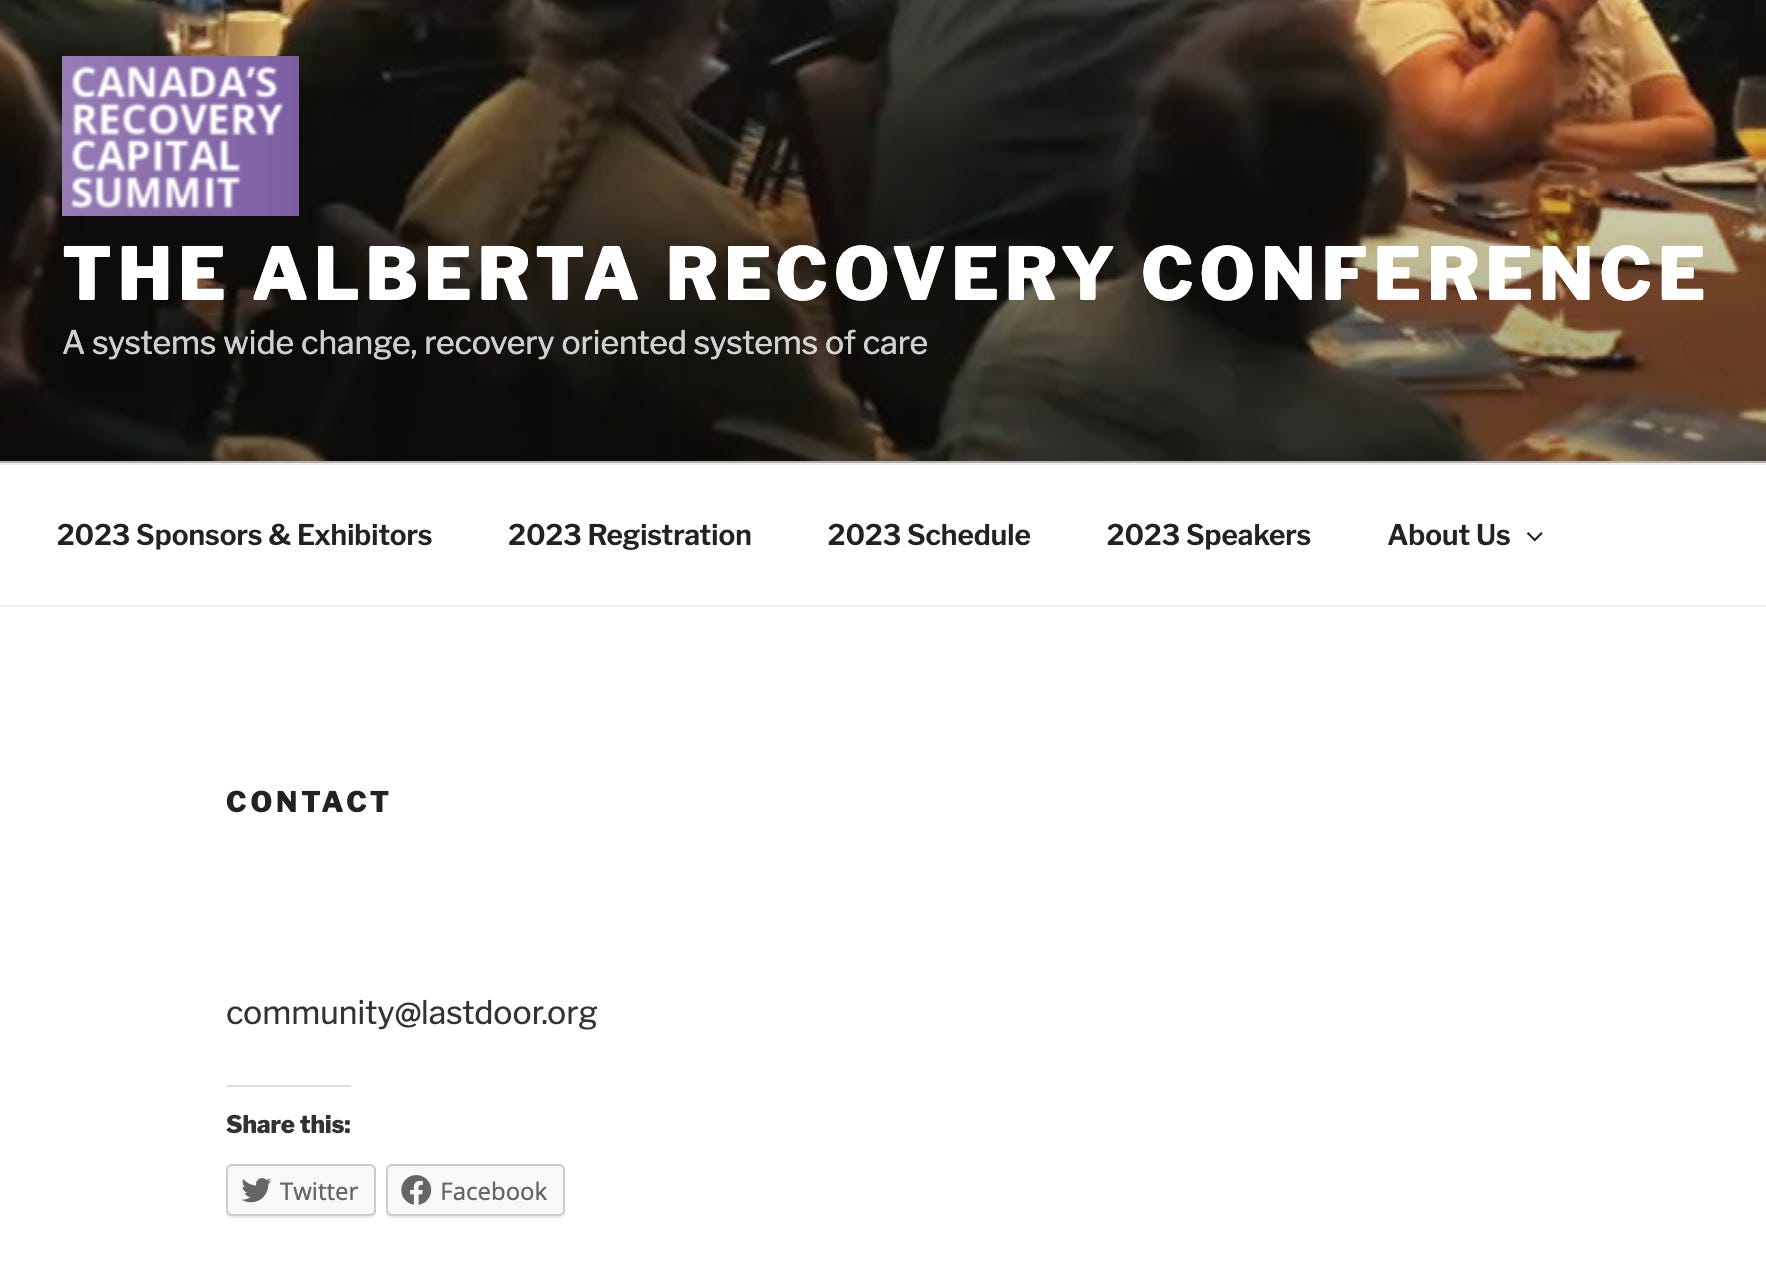 Alberta Recovery Conference web page showing community@lastdoor.org as primary contact